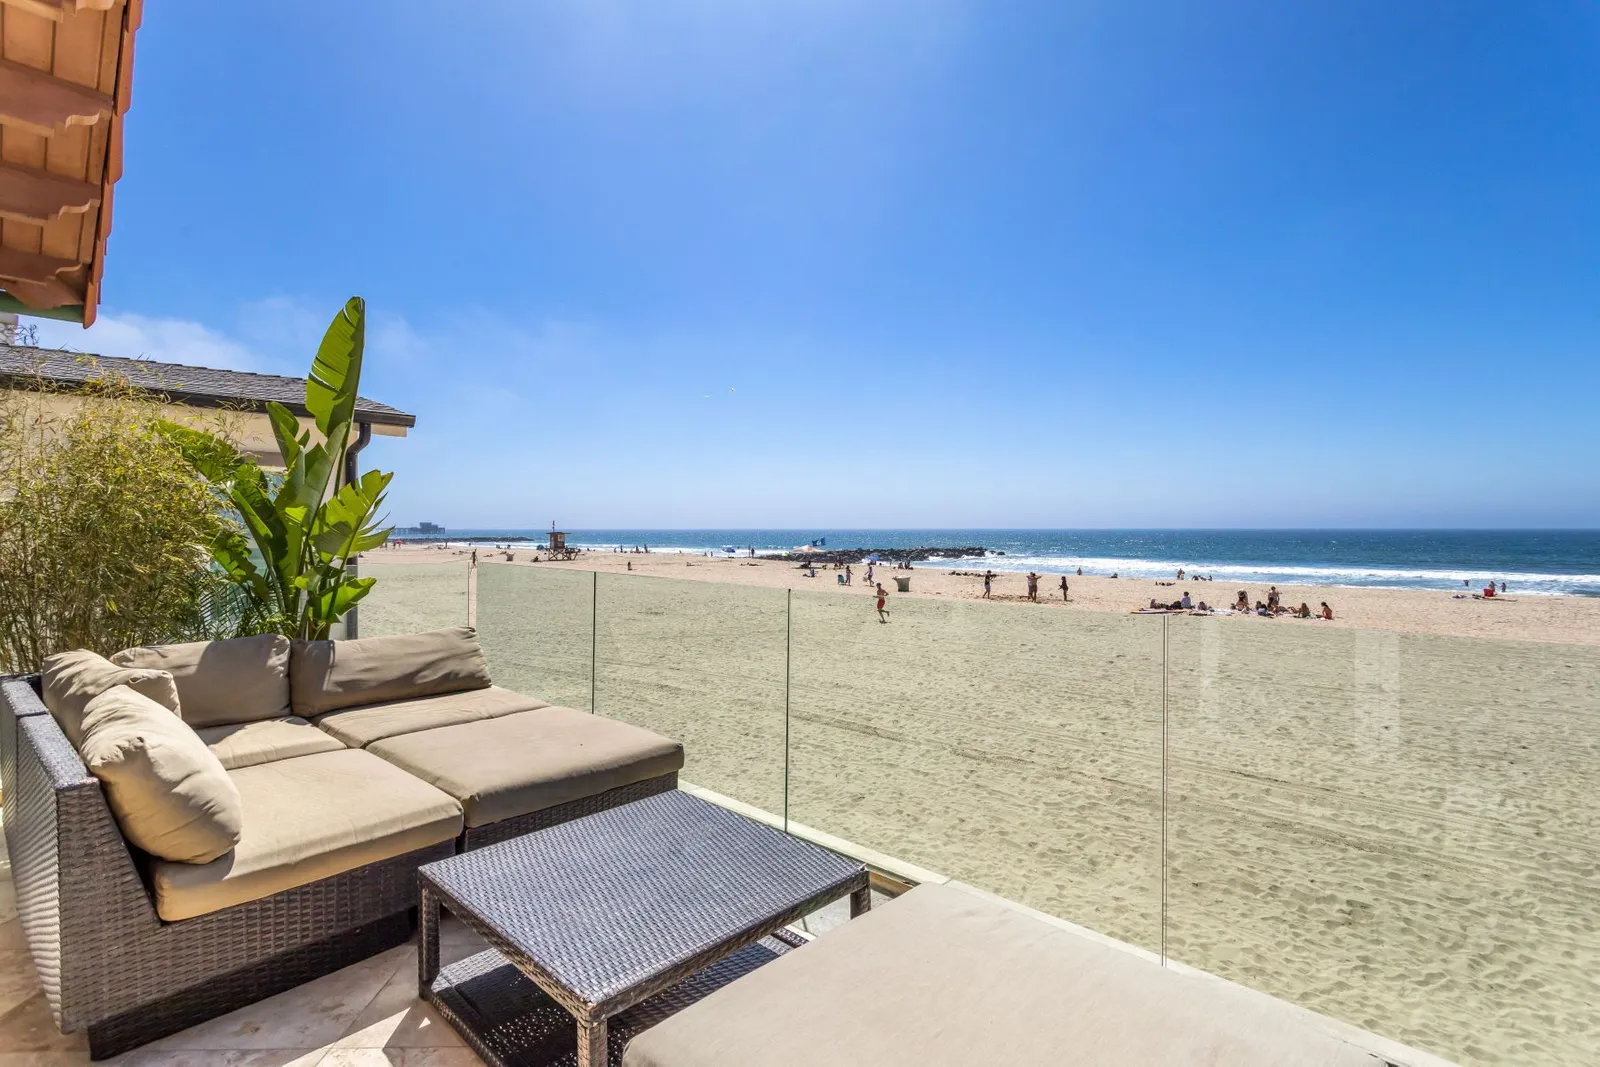 NEWPORT BEACH CA – Lovely beach house with 2 fully equiped floors for sale